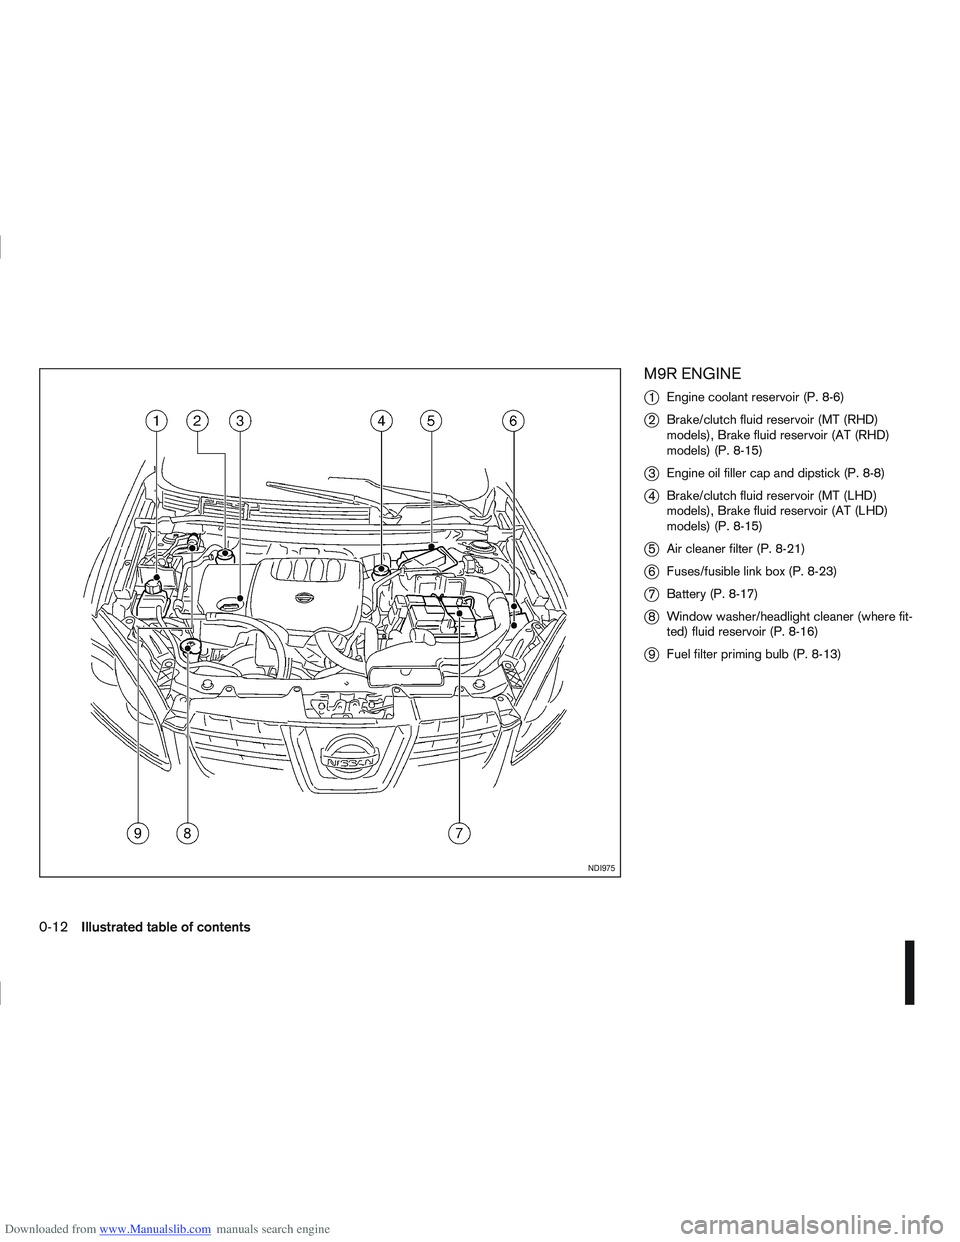 NISSAN QASHQAI 2006  Owners Manual Downloaded from www.Manualslib.com manuals search engine M9R ENGINE
j
1Engine coolant reservoir (P. 8-6)
j2Brake/clutch fluid reservoir (MT (RHD)
models), Brake fluid reservoir (AT (RHD)
models) (P. 8